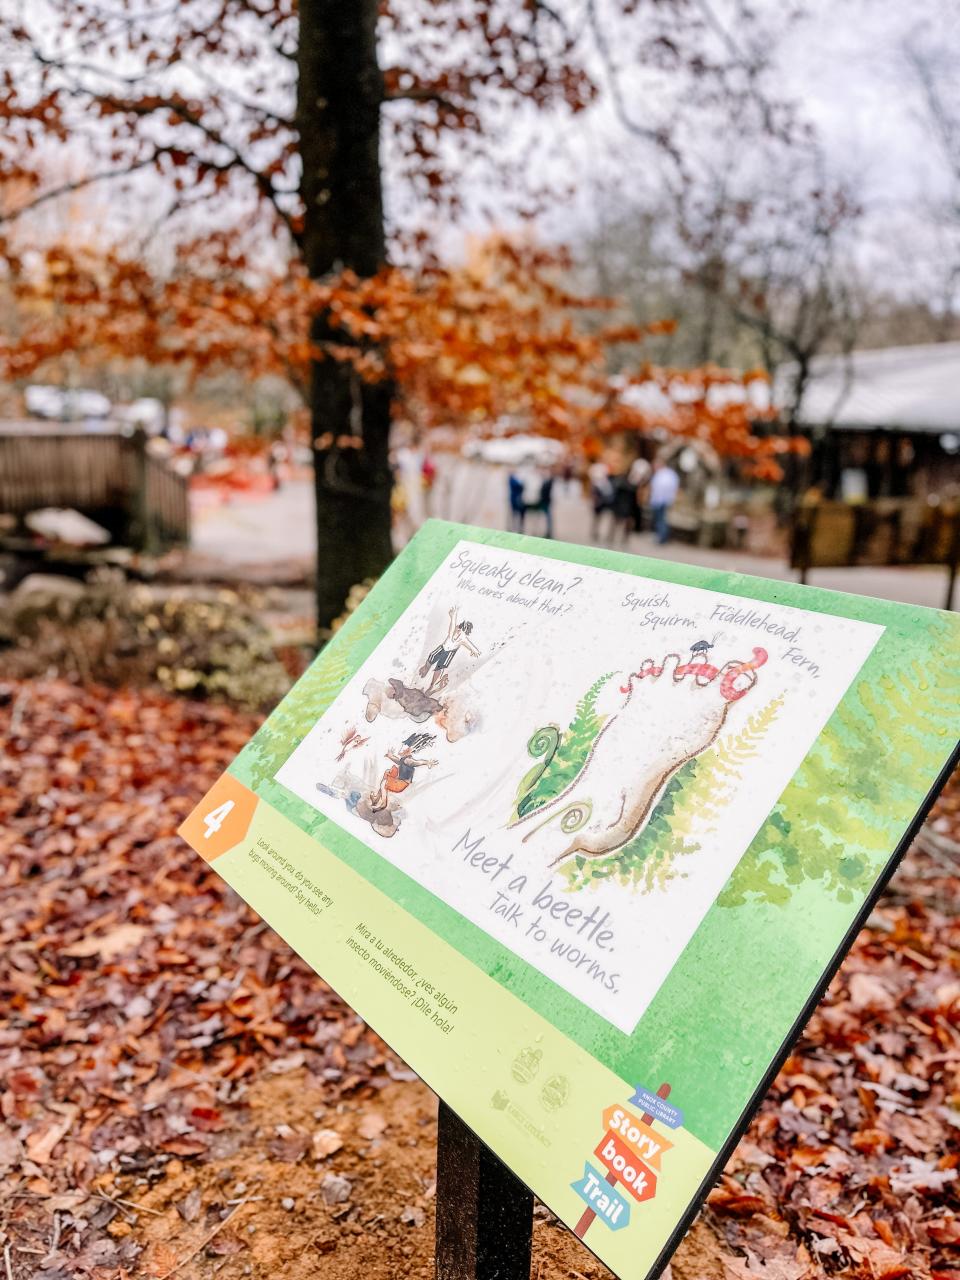 Public Library Storybook trail at Ijams Nature Center features “Run Wild” by David Covell, a story celebrating nature and a carefree spirit. Nov. 30, 2022.